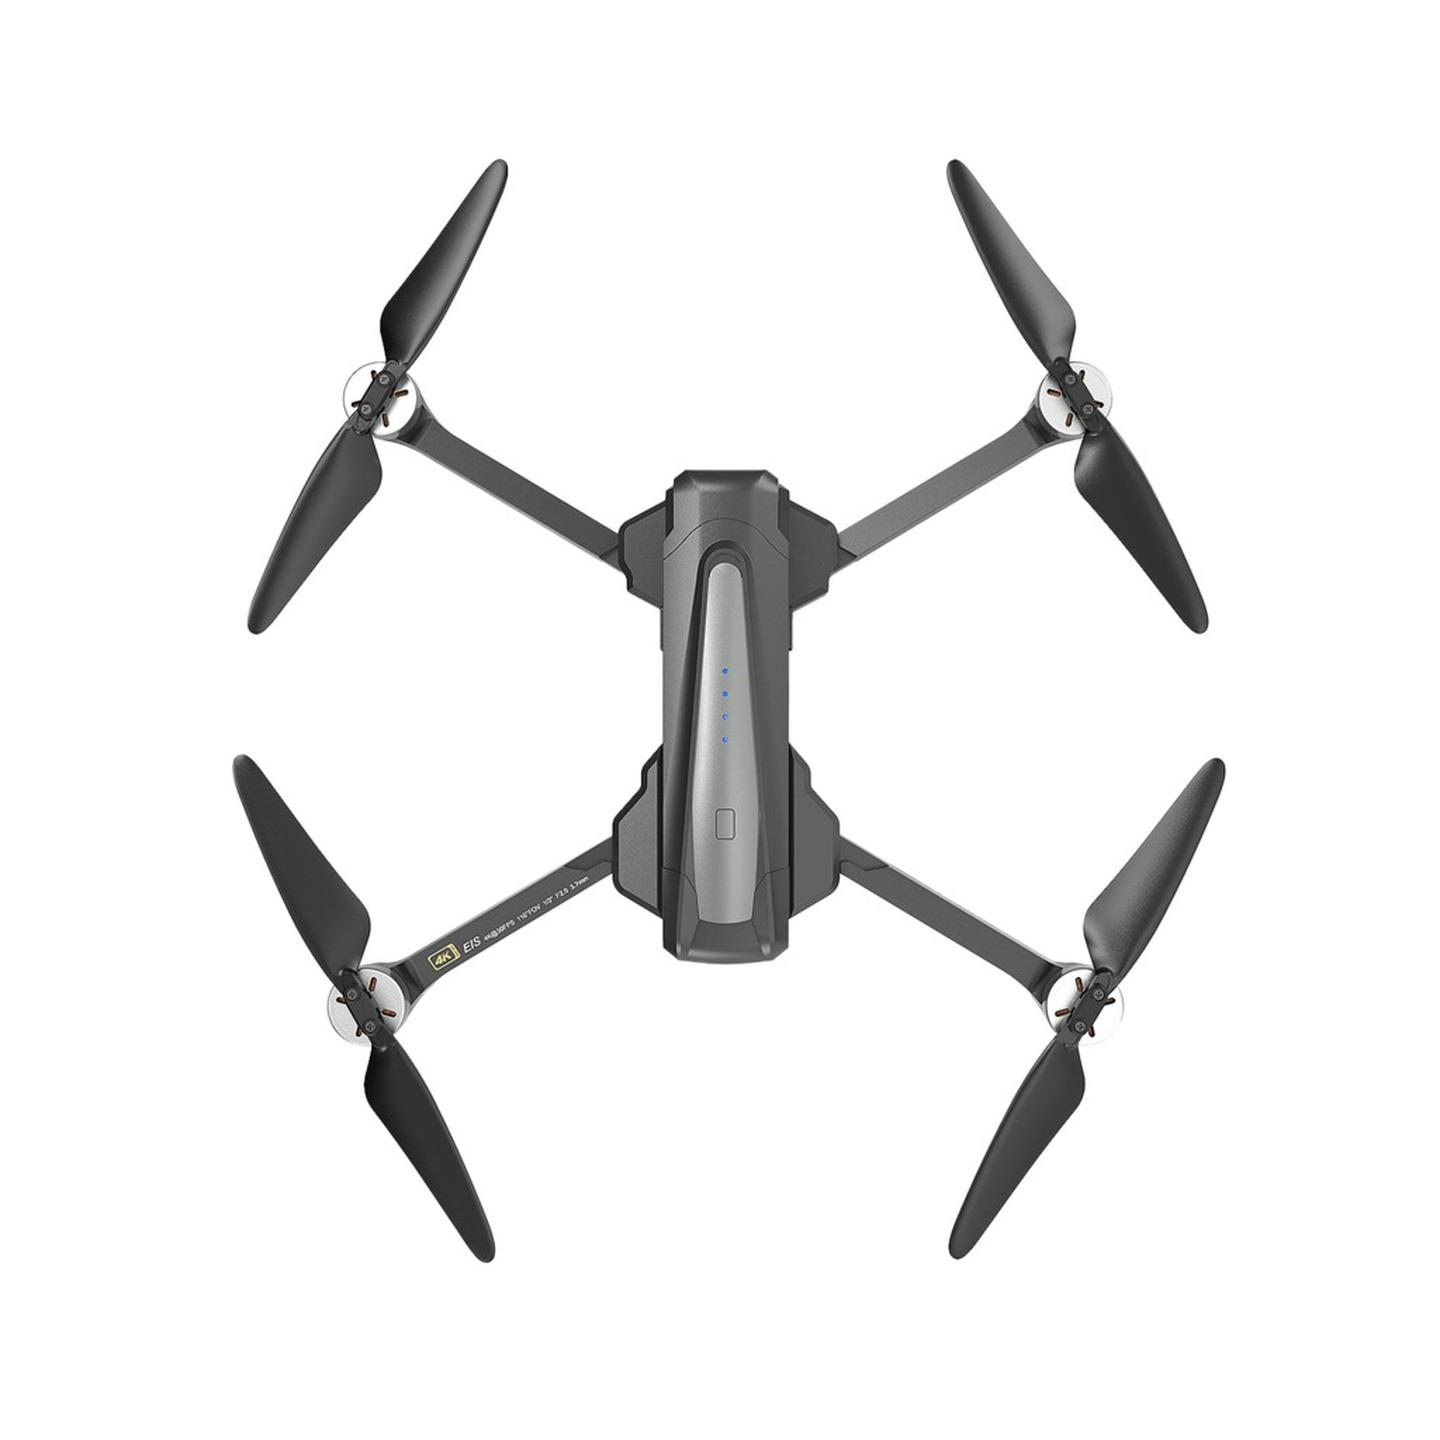 Bugs R/C Foldable Drone with 4K Camera